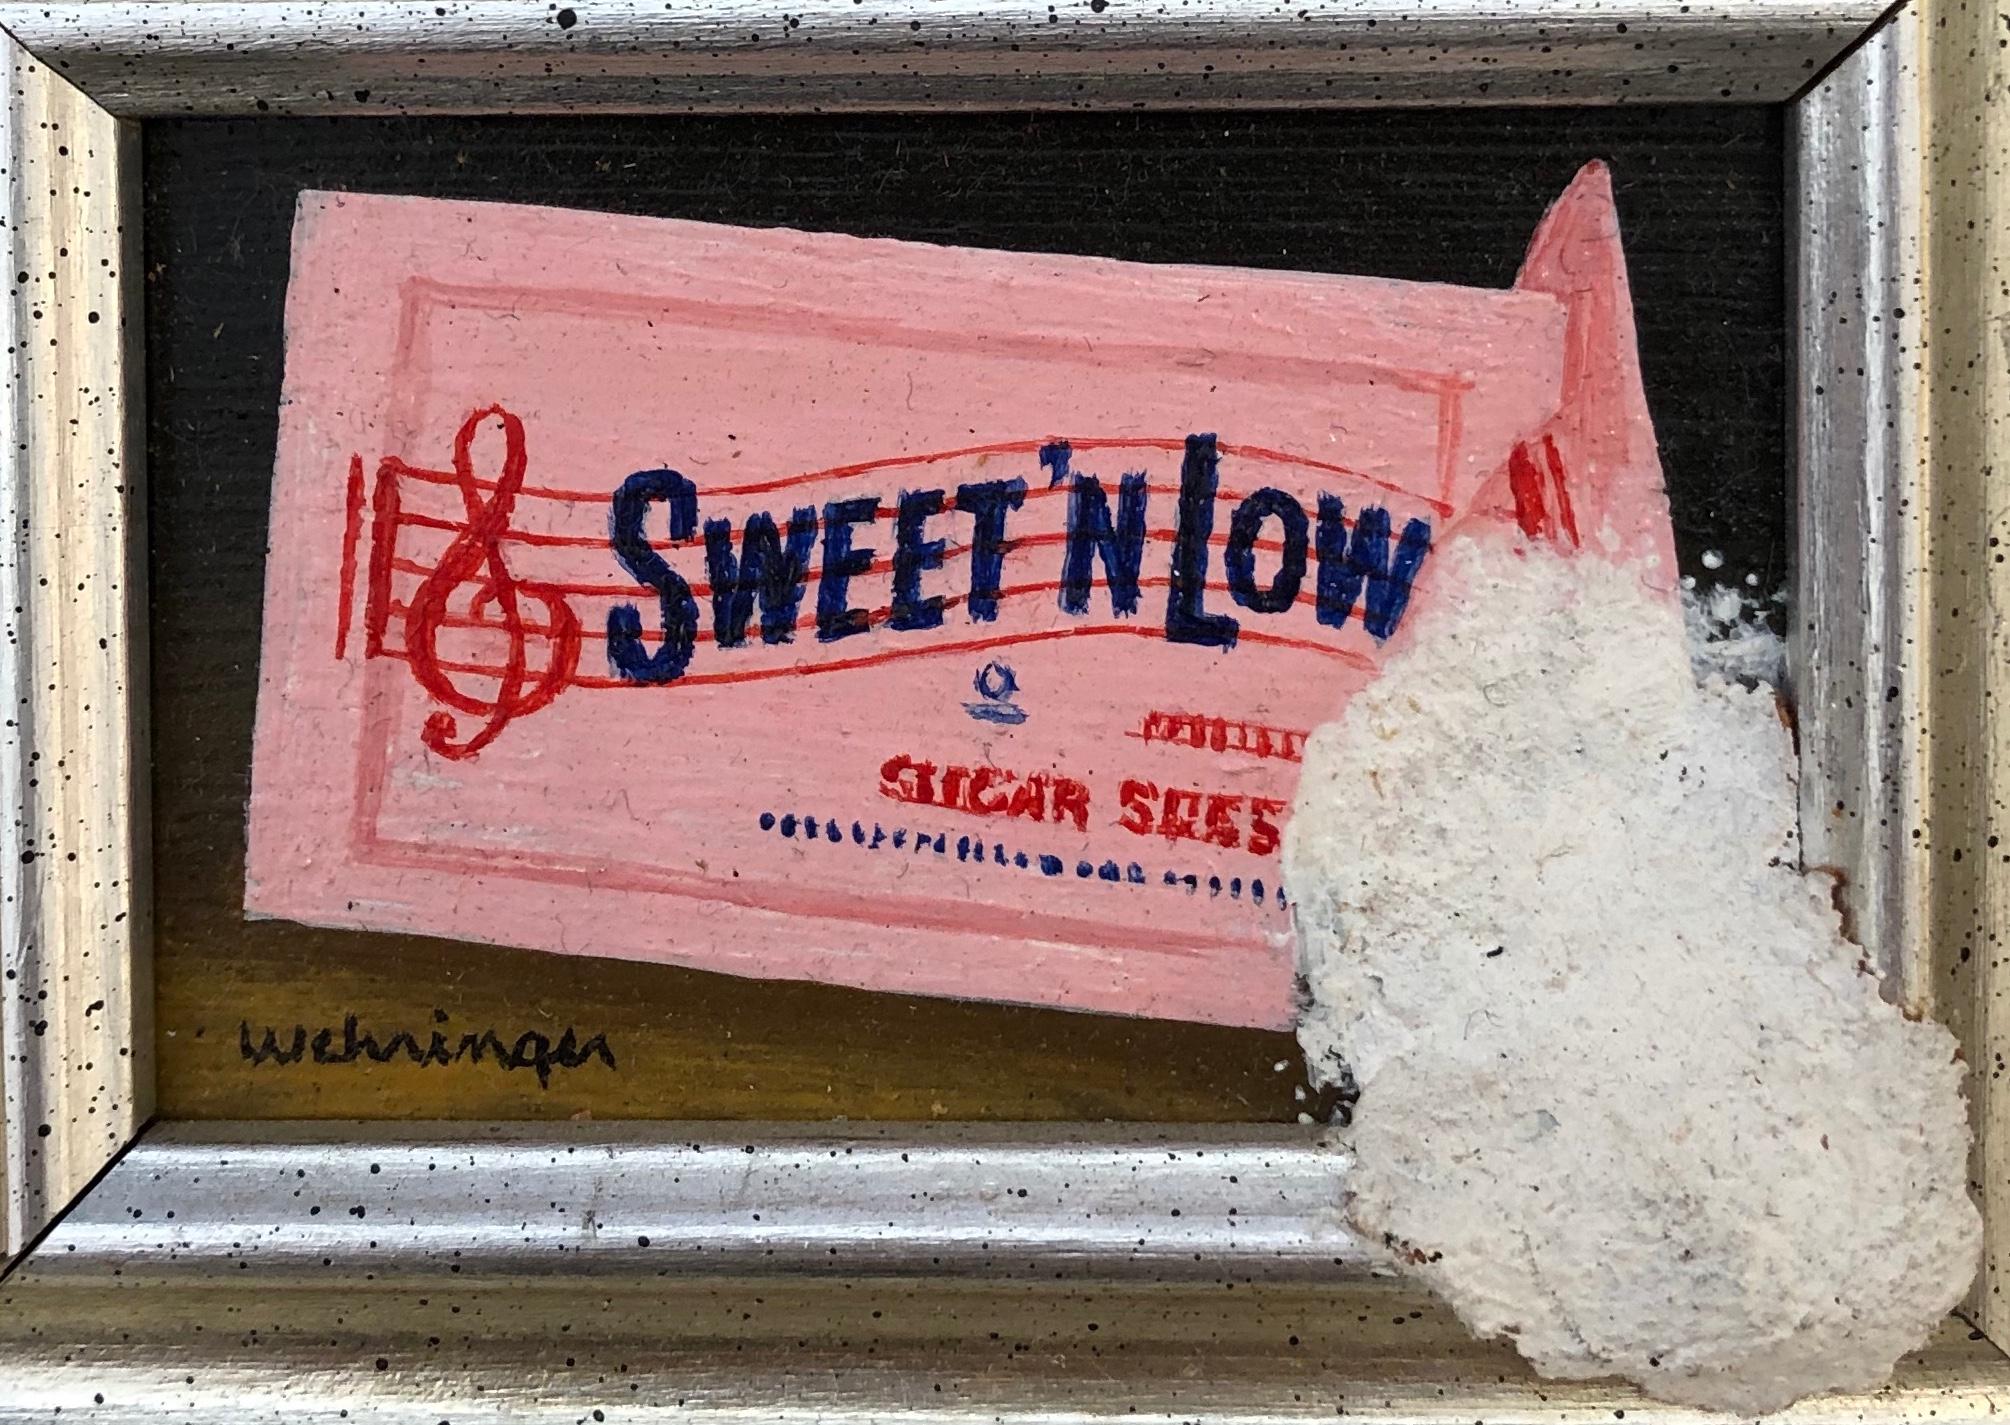 Charles Wehringer Still-Life Painting - "Sweet n' Low"